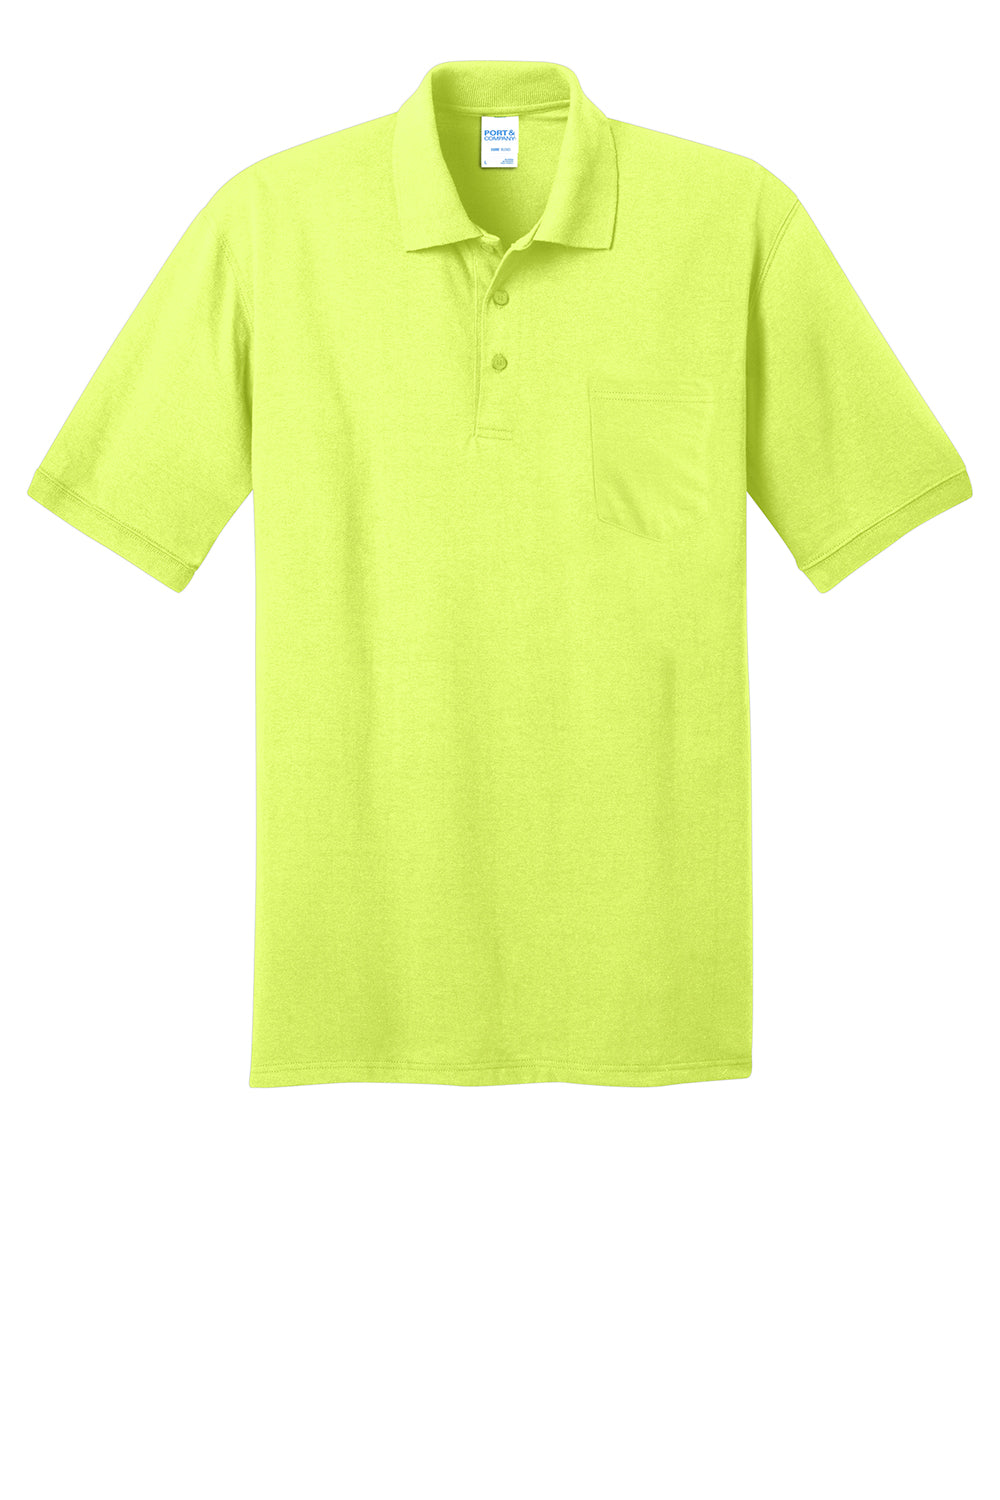 Port & Company KP55P Mens Core Stain Resistant Short Sleeve Polo Shirt w/ Pocket Safety Green Flat Front